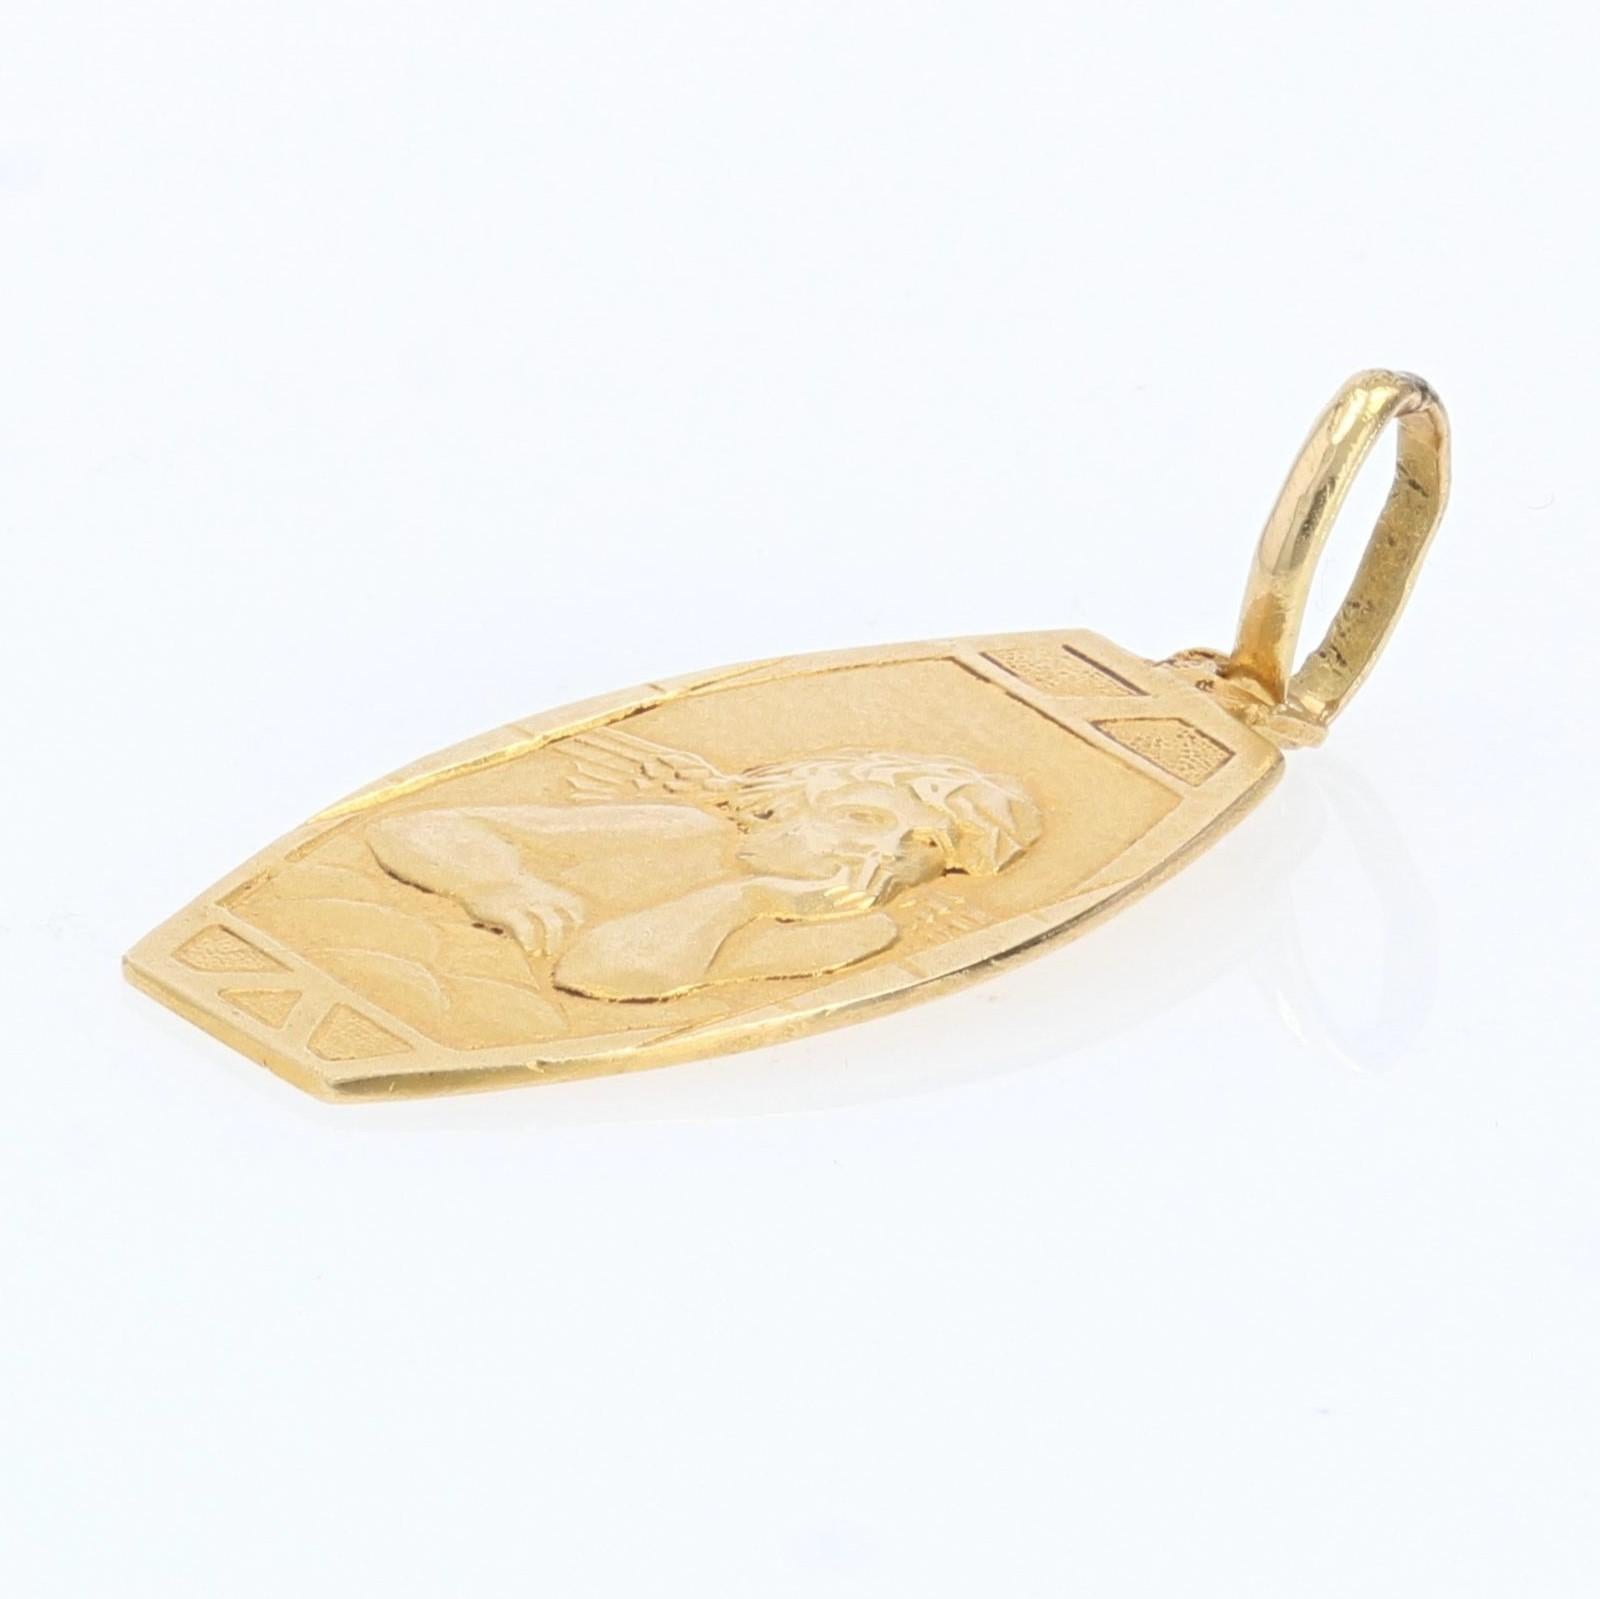 Medal in 18 karat yellow gold, eagle head hallmark.
Of oval shape with cut sides, this medal of baptism in yellow gold represents an angel on its cloud.
Pendant sold alone without its chain of presentation.
Height : 2,6 cm, width at the widest :